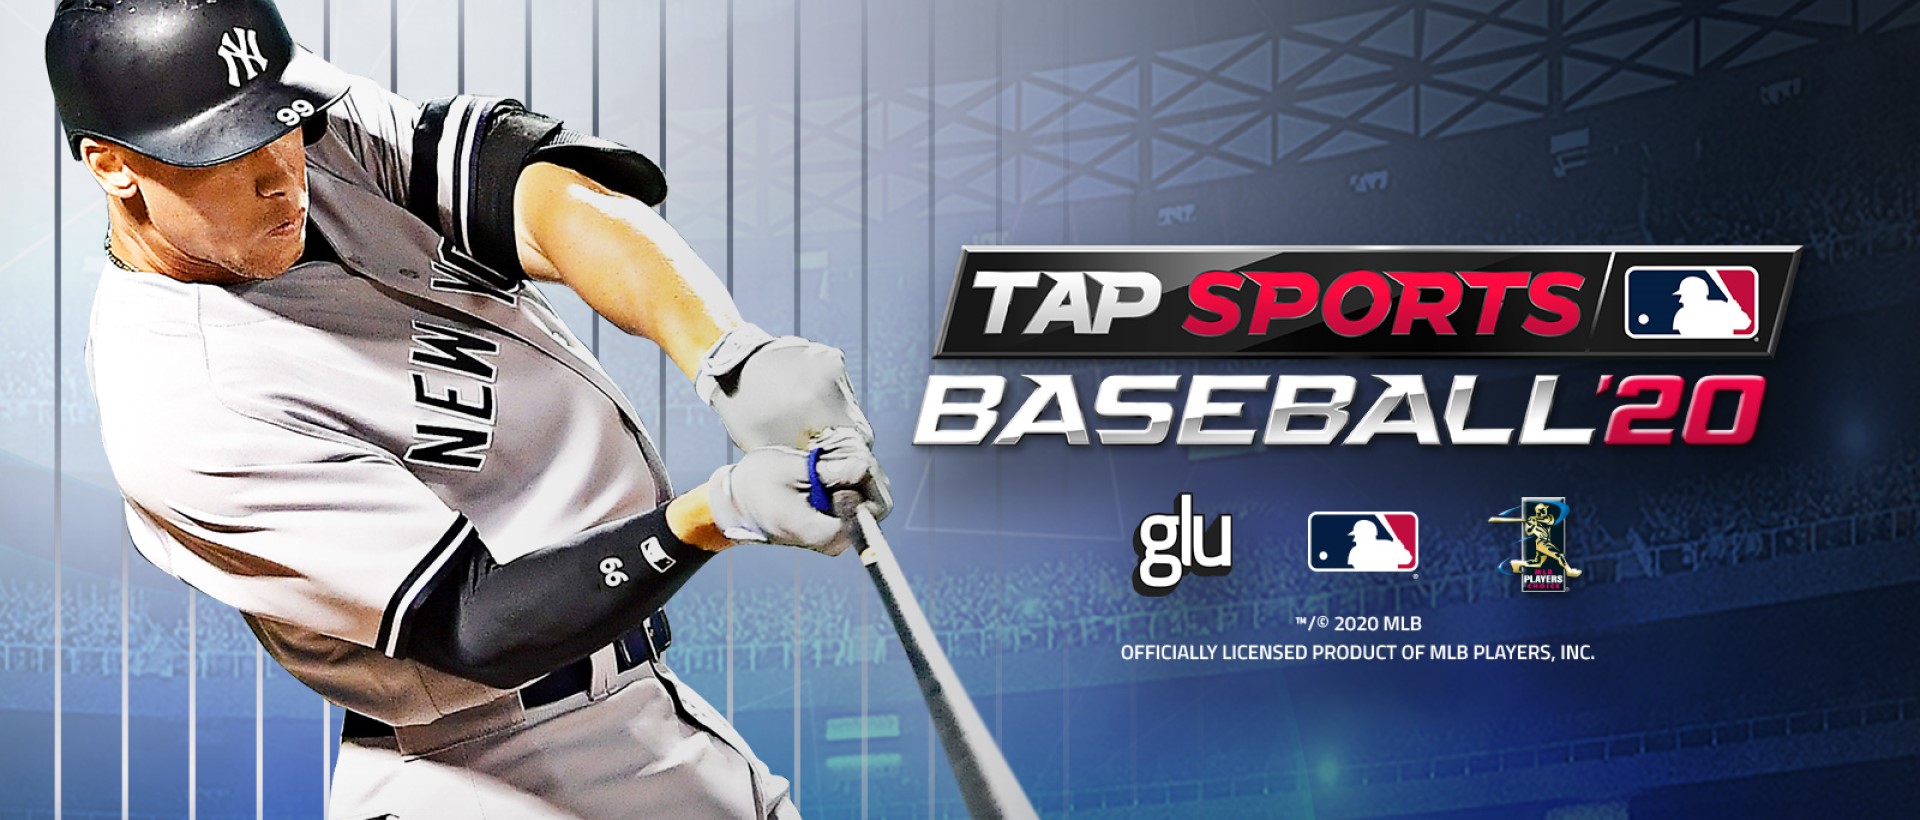 Download MLB Tap Sports Baseball 2020 on PC with NoxPlayer Appcenter